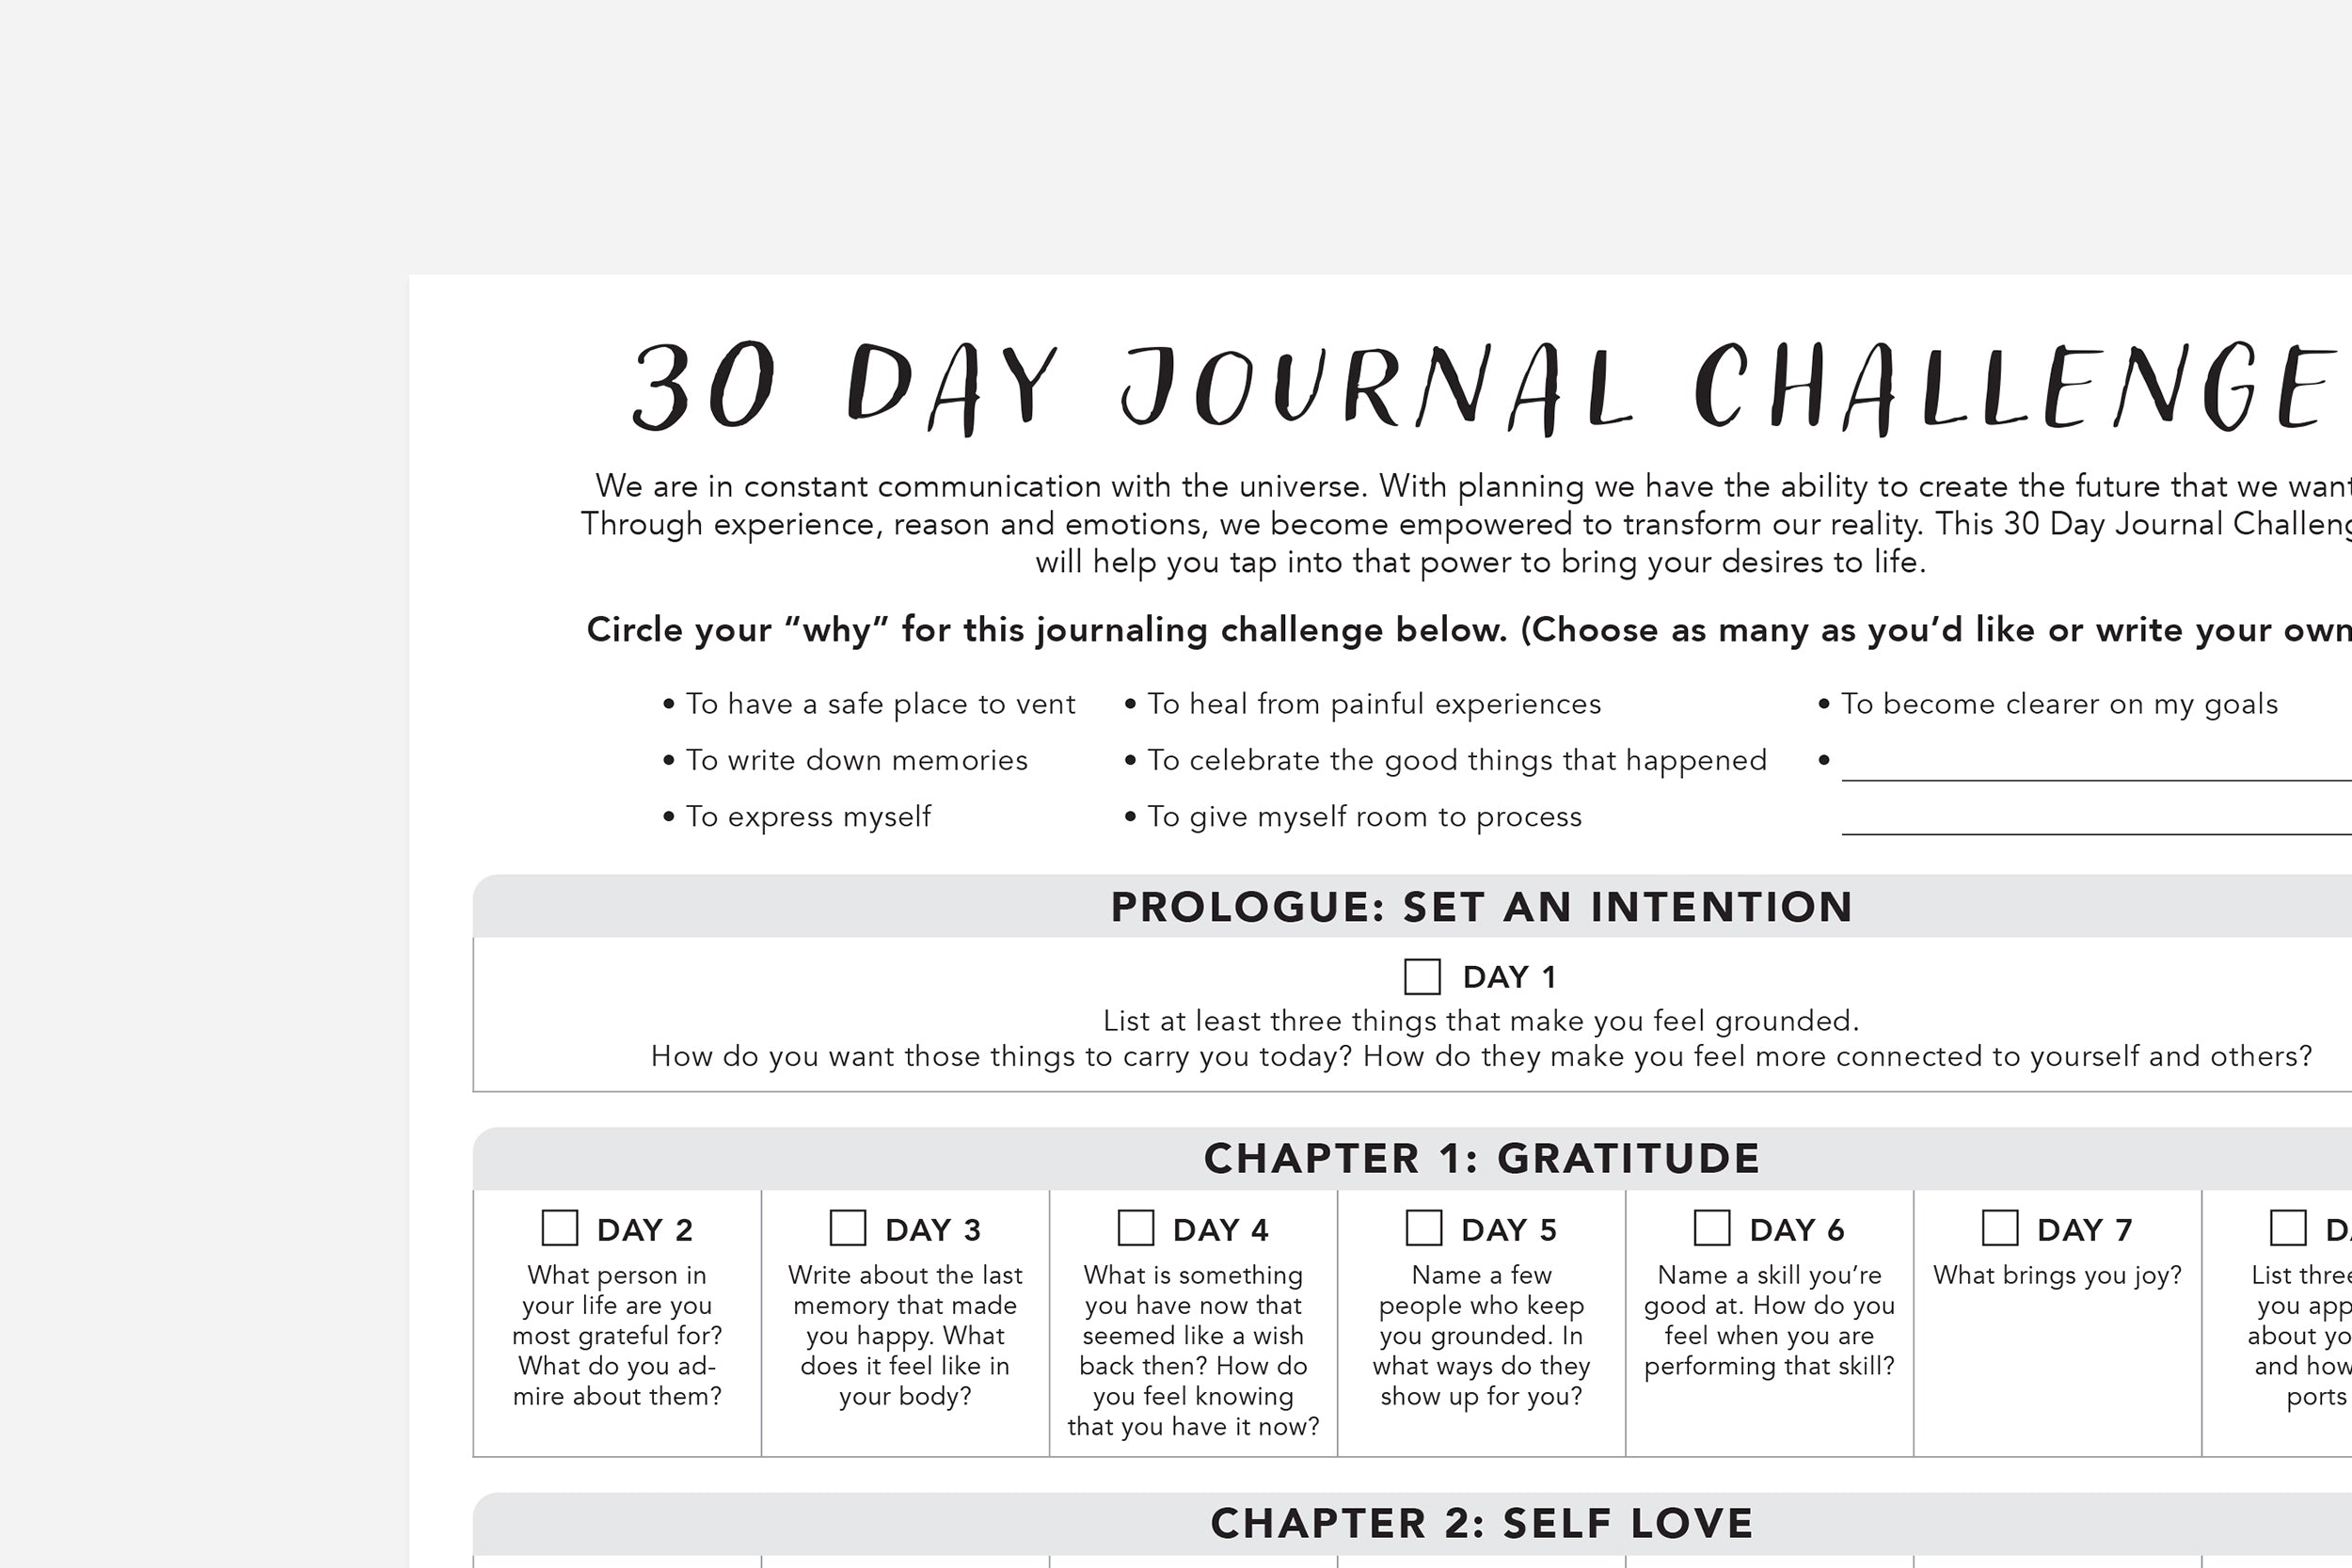 30 Day Journal Challenge - Passion Planner